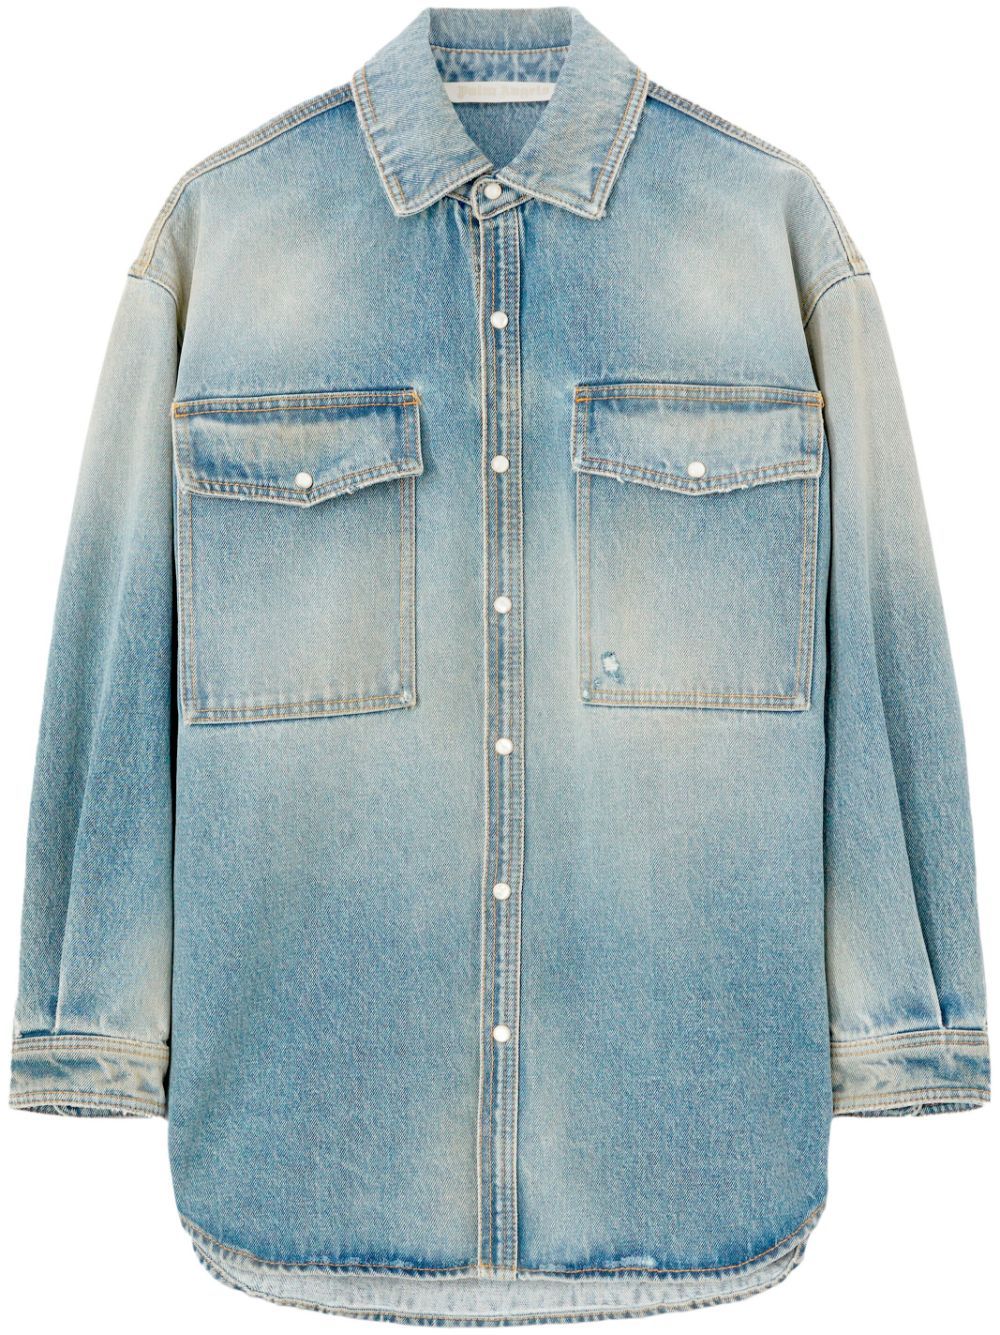 PALM ANGELS Denim Embroidered Overshirt for Women - FW23 Collection